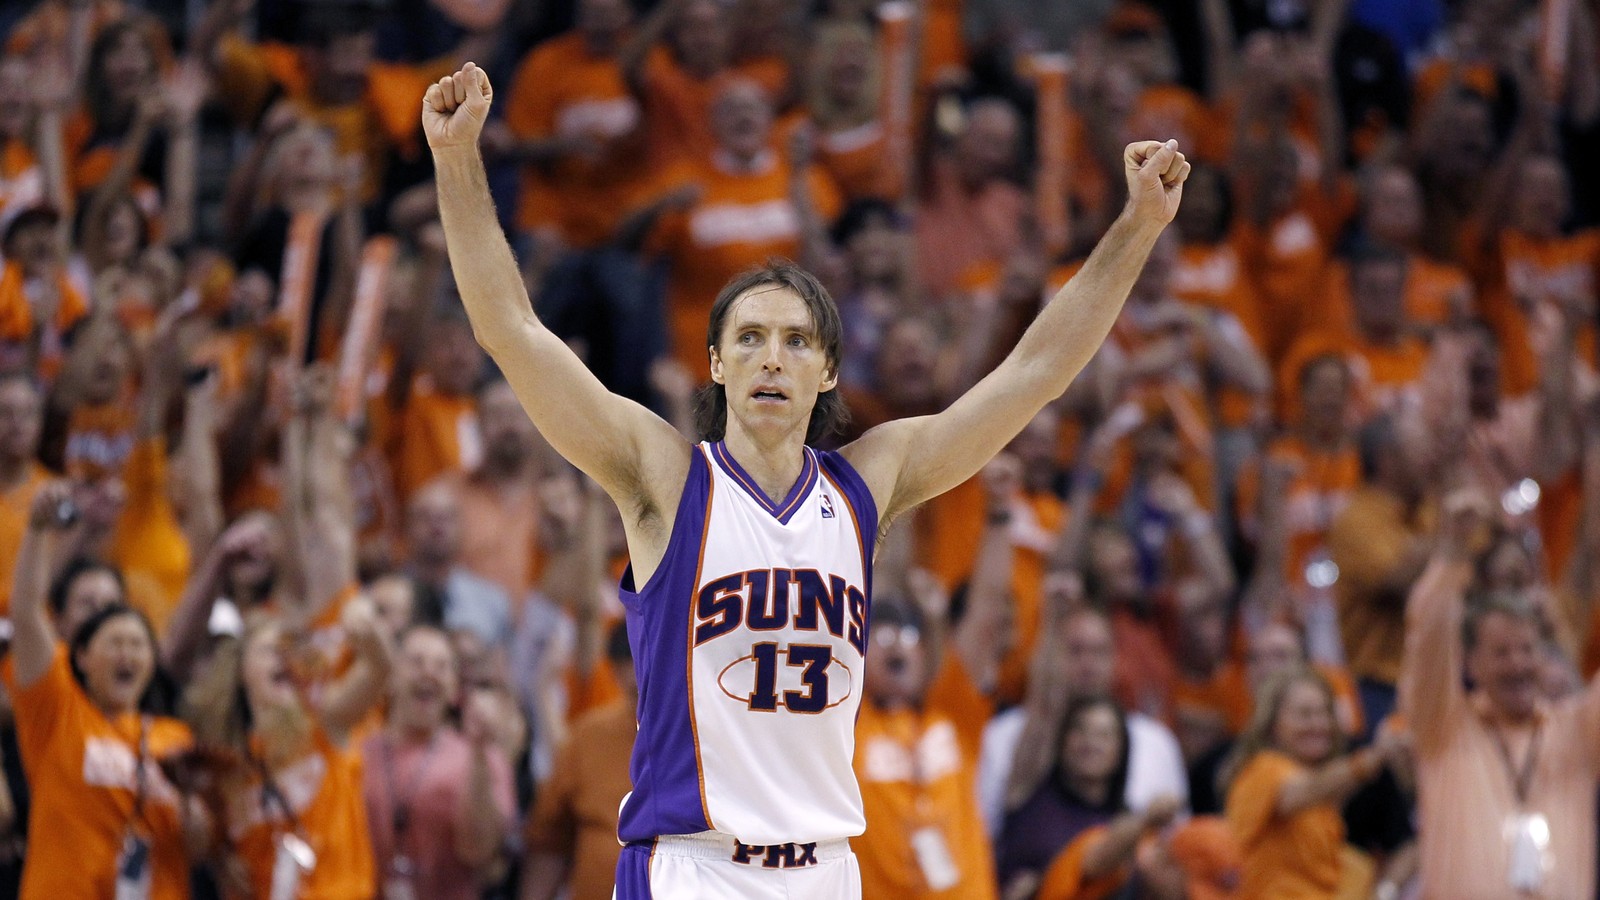 What Could Be Next For Steve Nash?